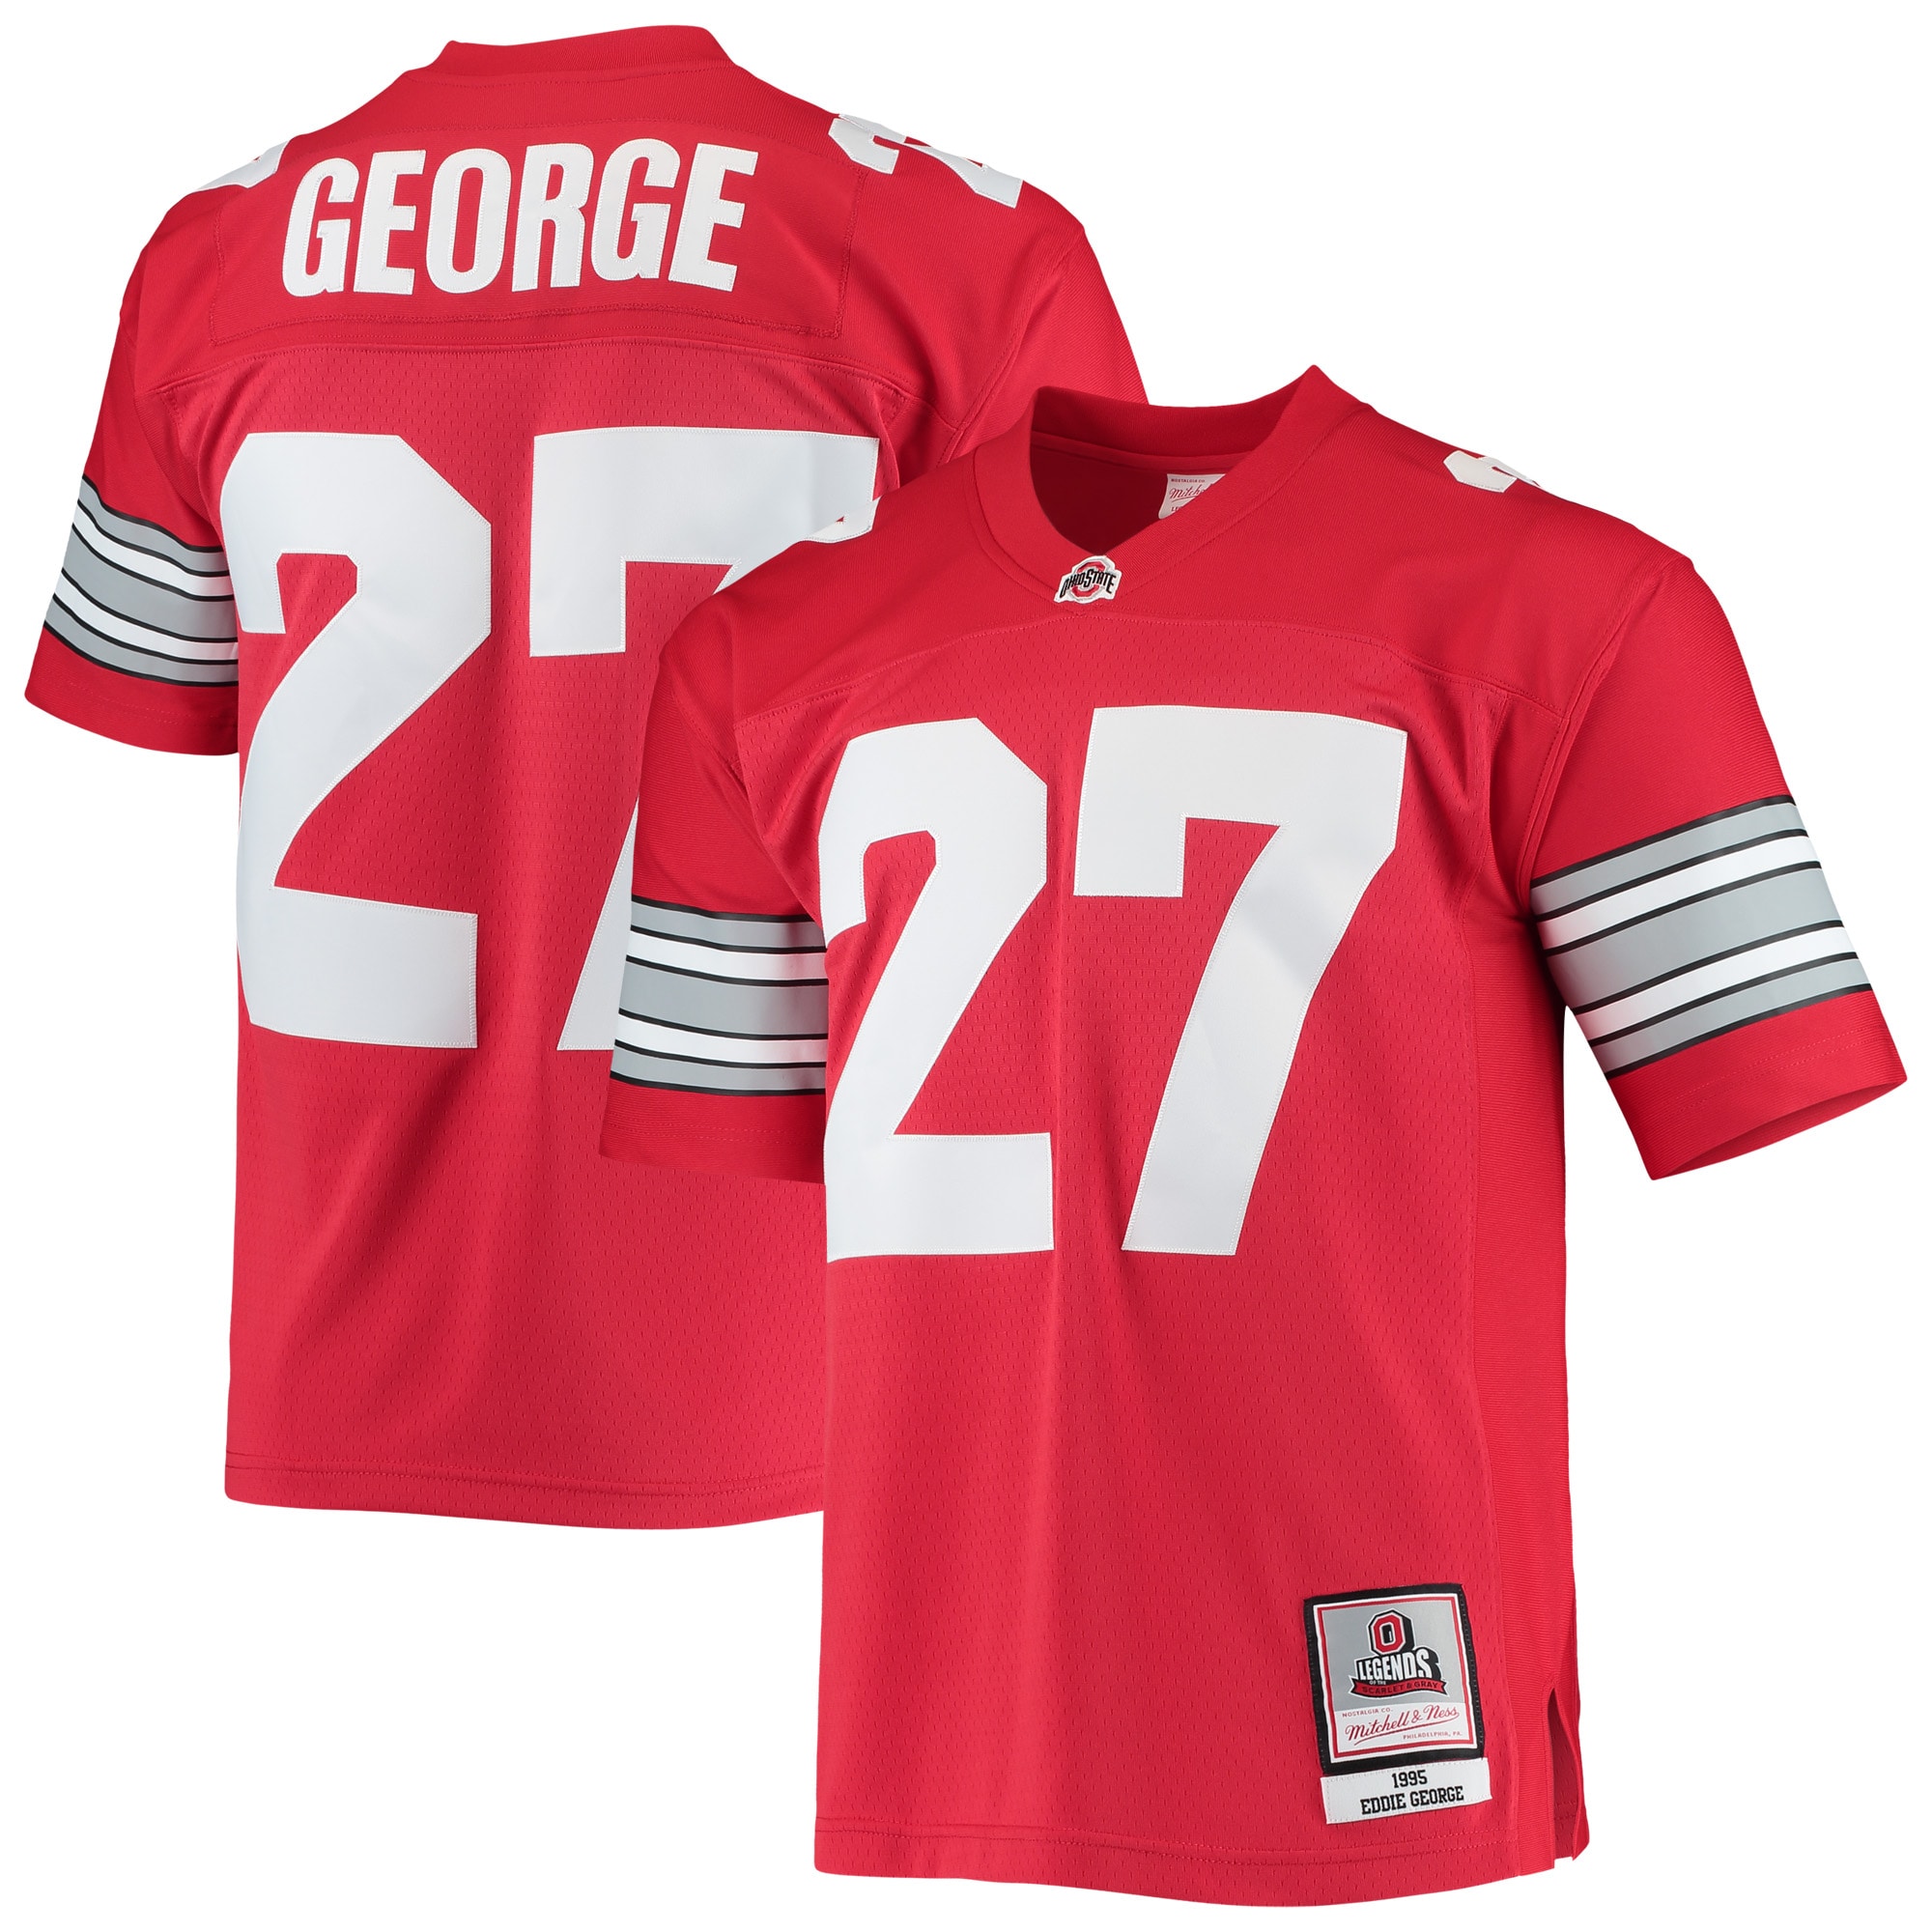 Eddie George Ohio State Buckeyes Mitchell & Ness 1995 Authentic Throwback Legacy Jersey - Scarlet For Youth Women Men